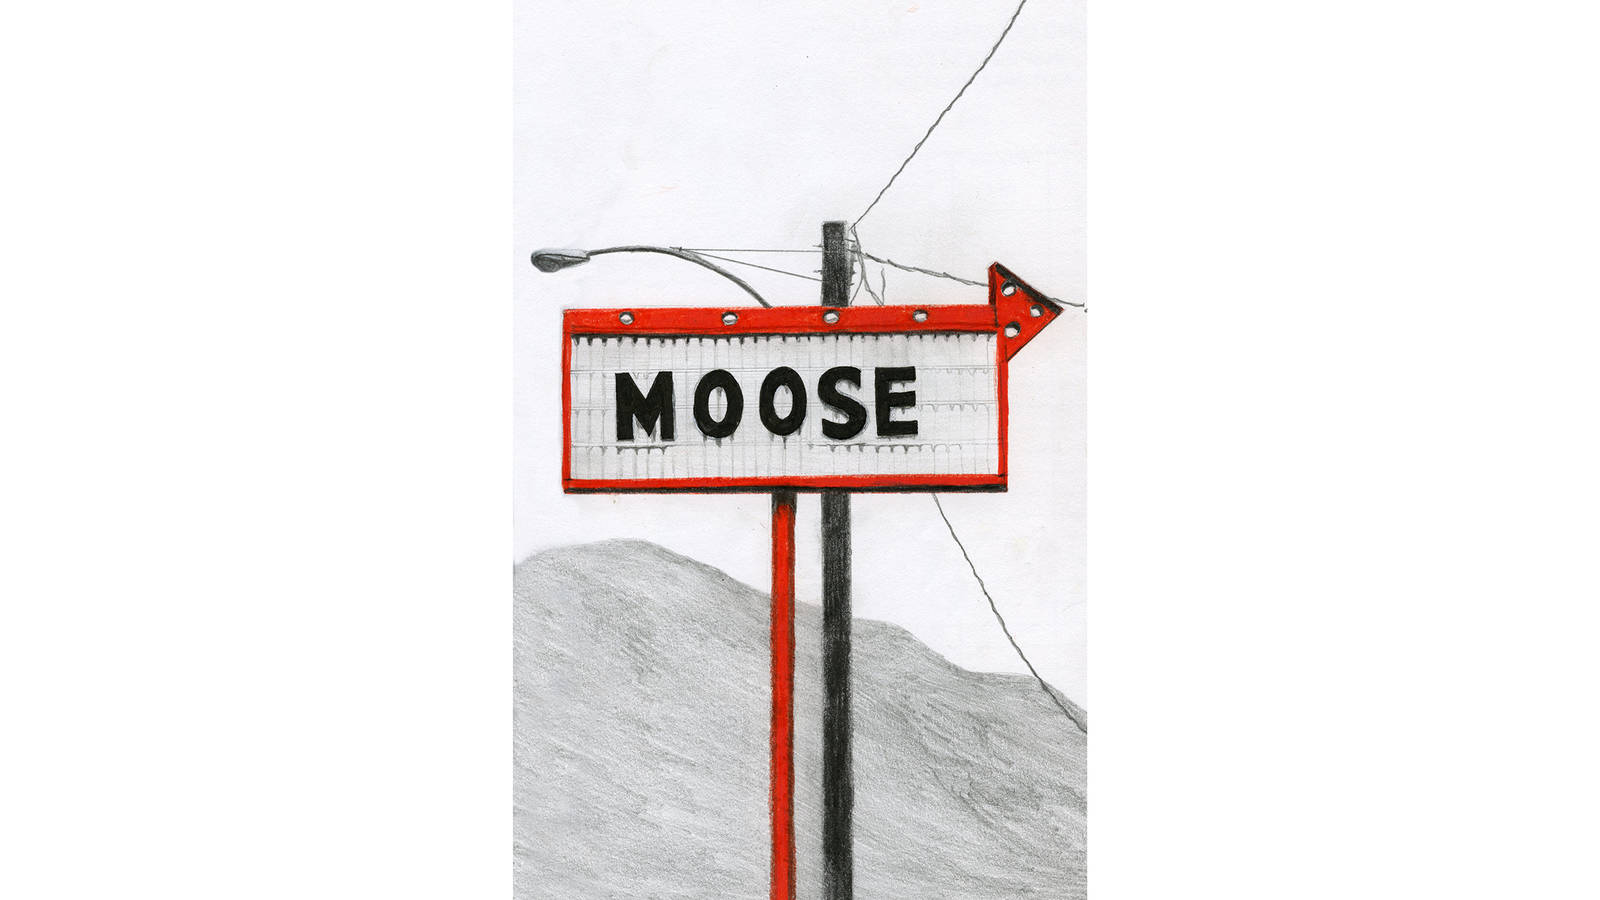 <h3 style="text-align: center; padding: 50px;"><span class="text-Intro-style">A sign Heckel spotted near the southern end of Lake Roosevelt in Lake Roosevelt National Recreation Area. Graphite and colored pencil on paper, 2017.</span></h3>